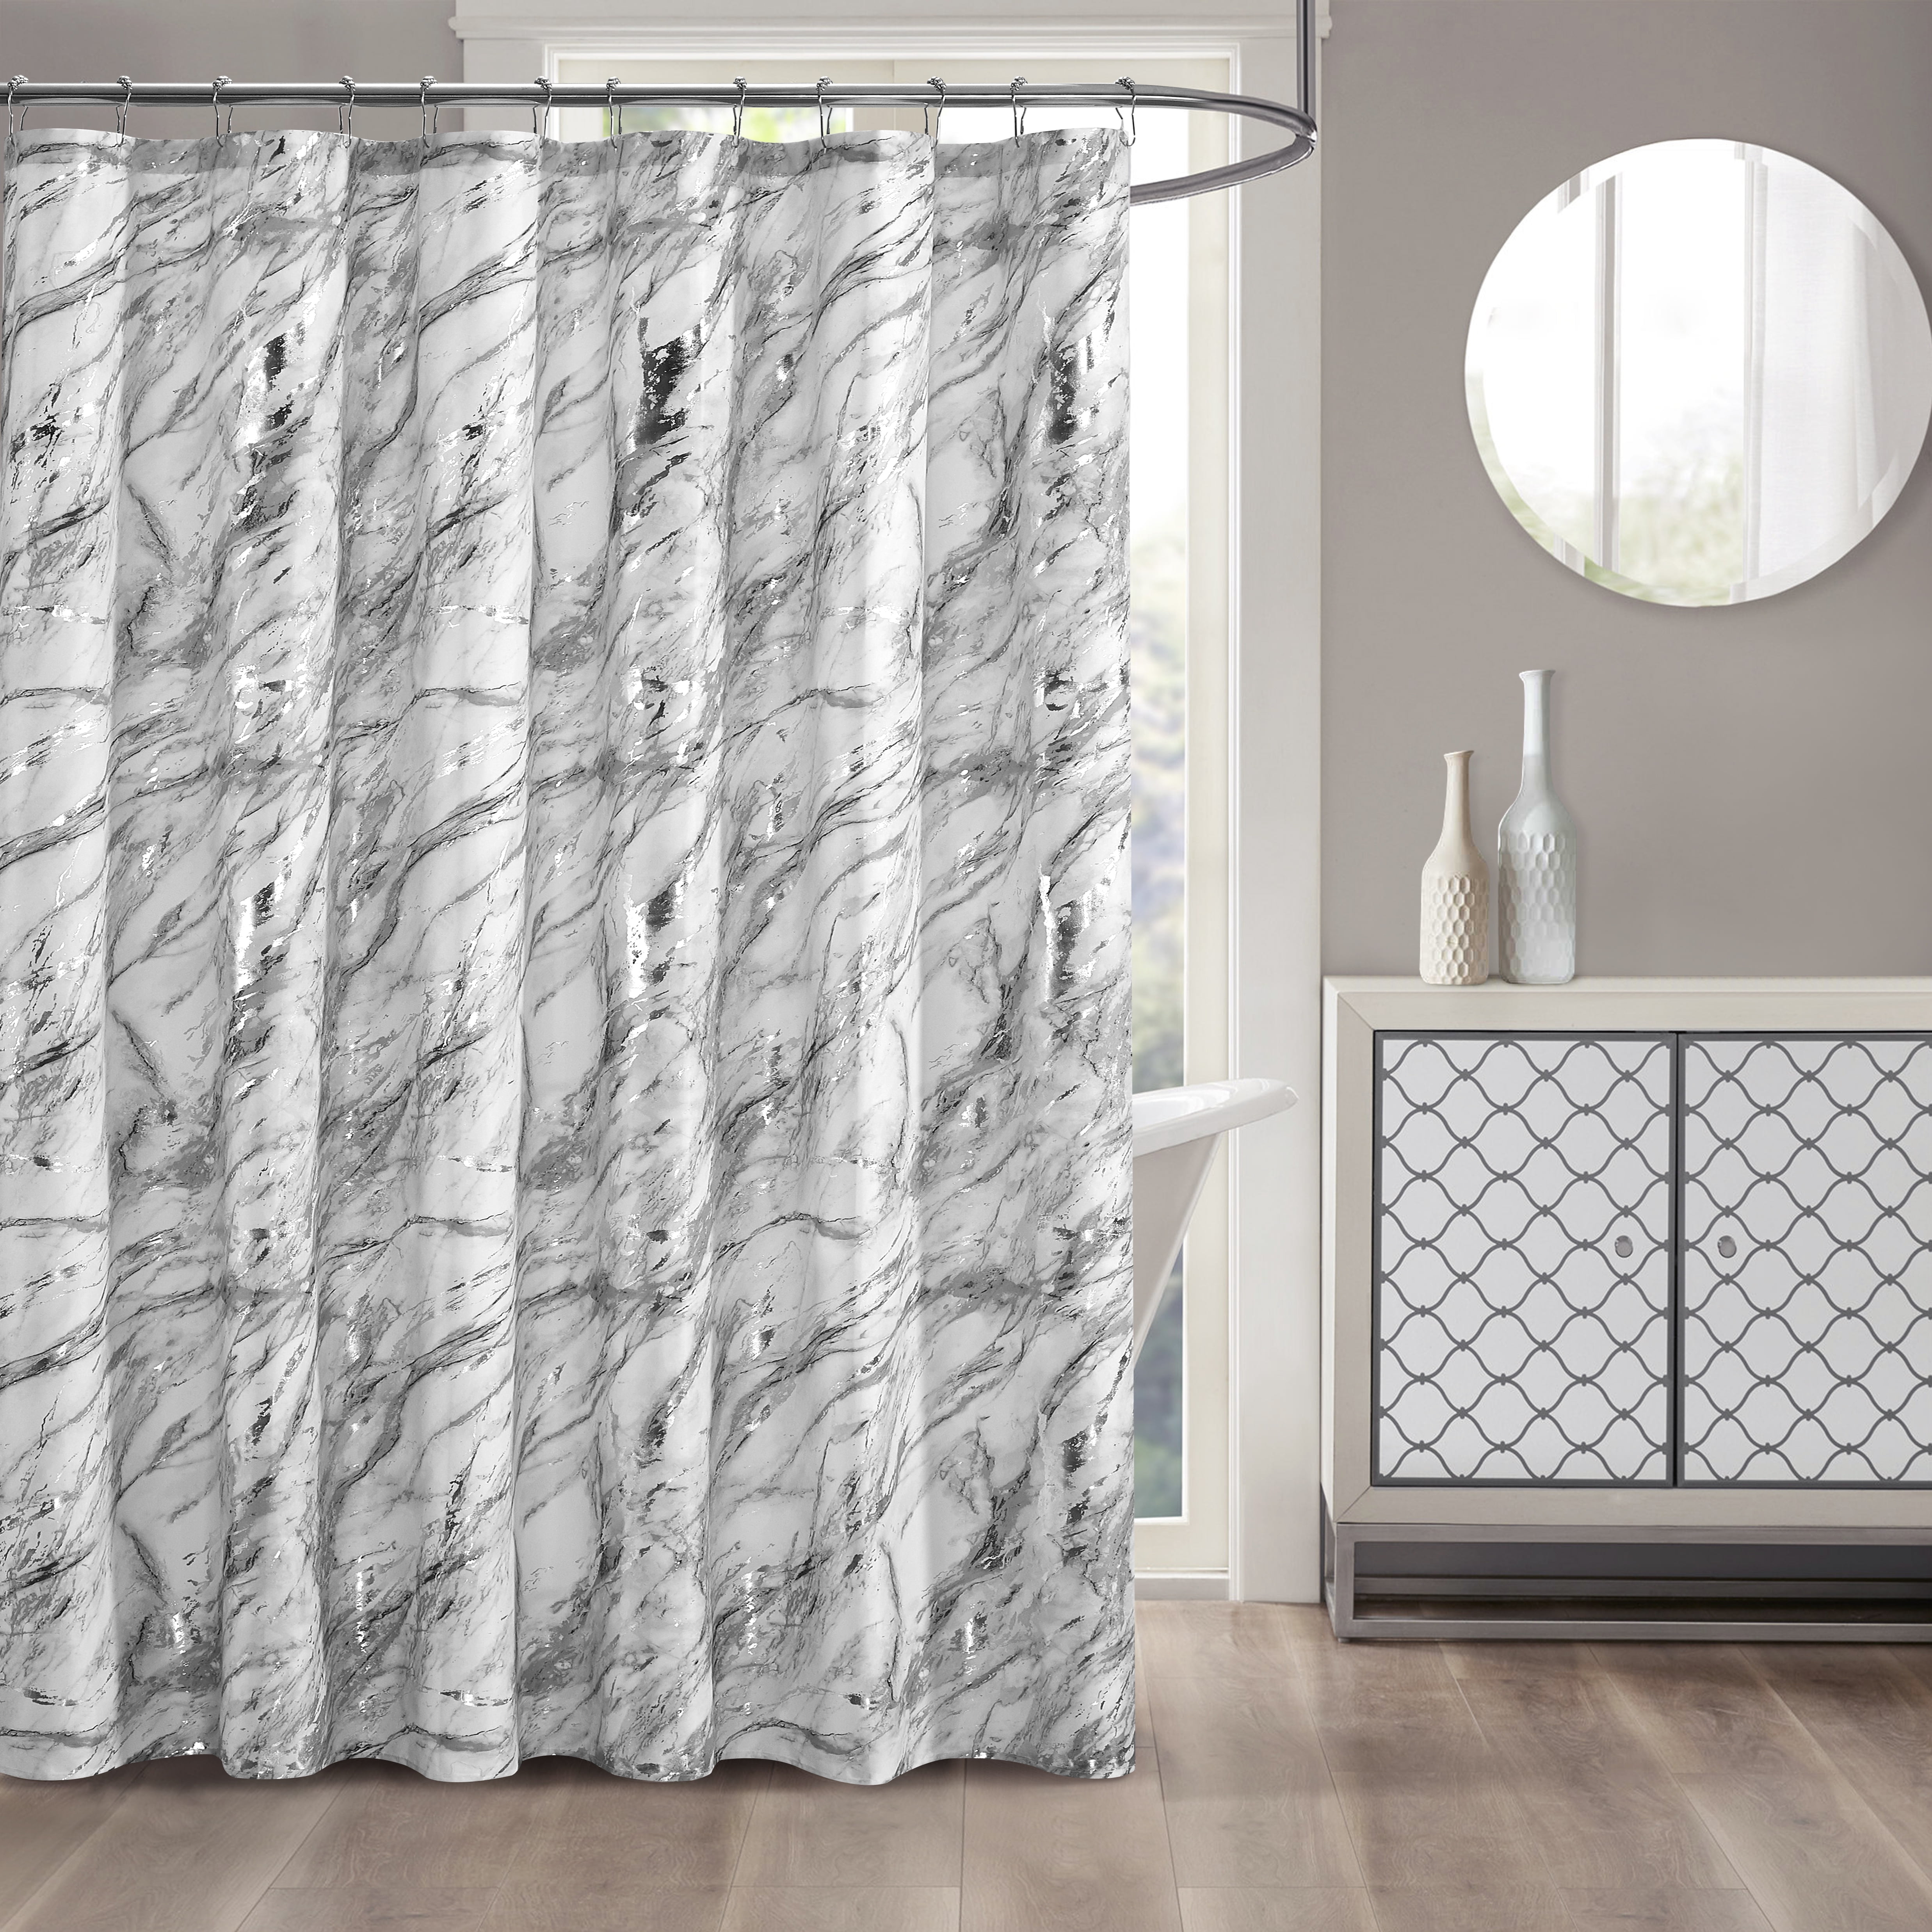 Baseball Style Pattern Bathroom Fabric Shower Curtain Set With Hooks 71Inch Long